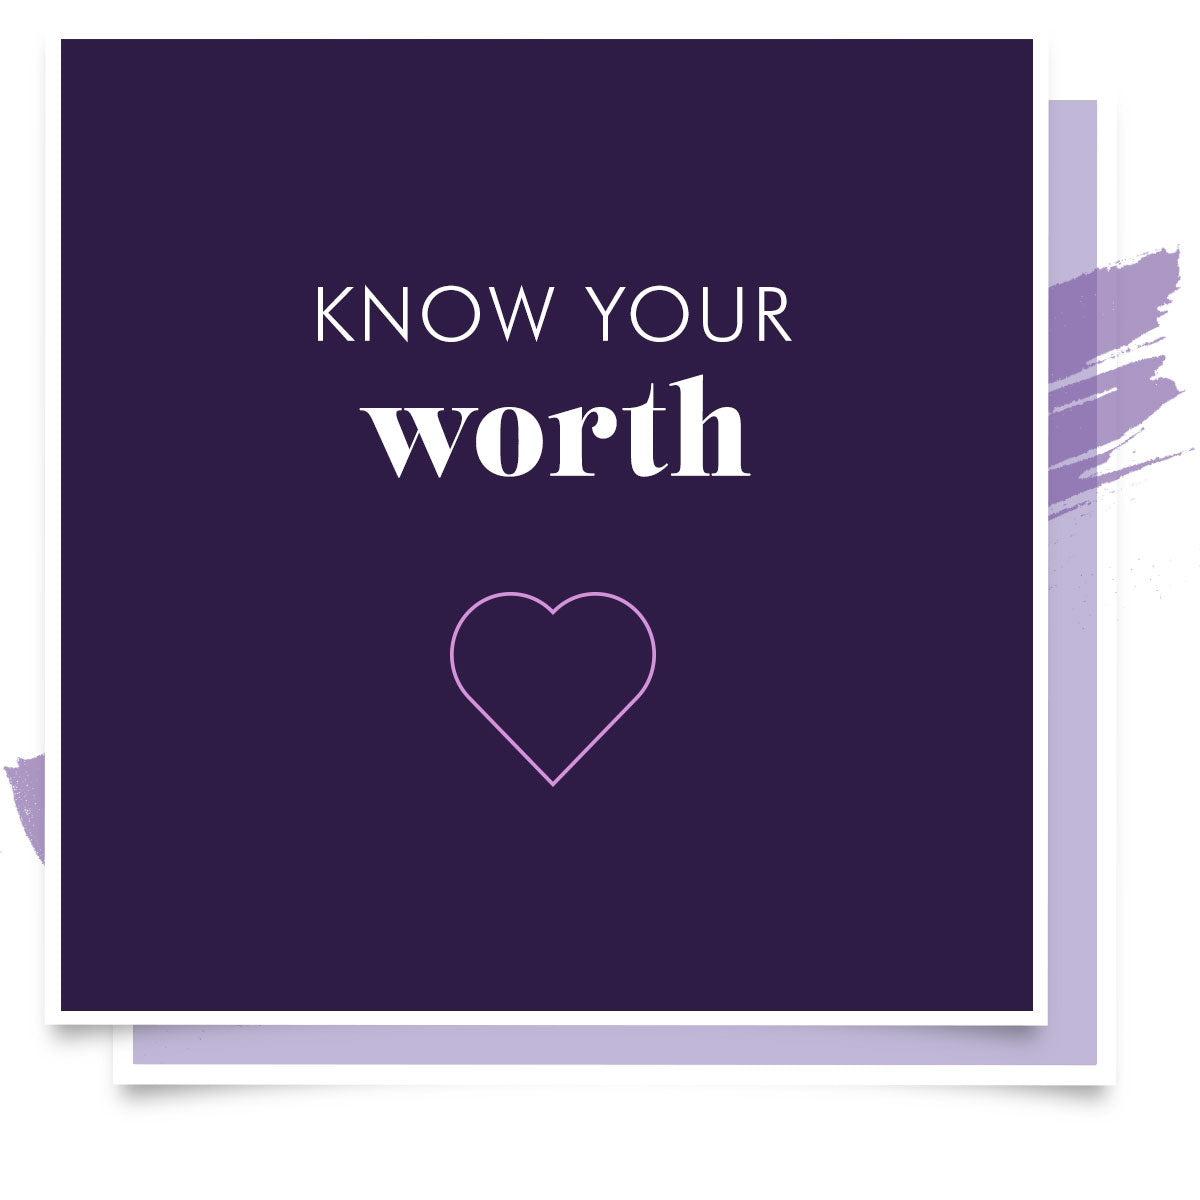 Know you worth